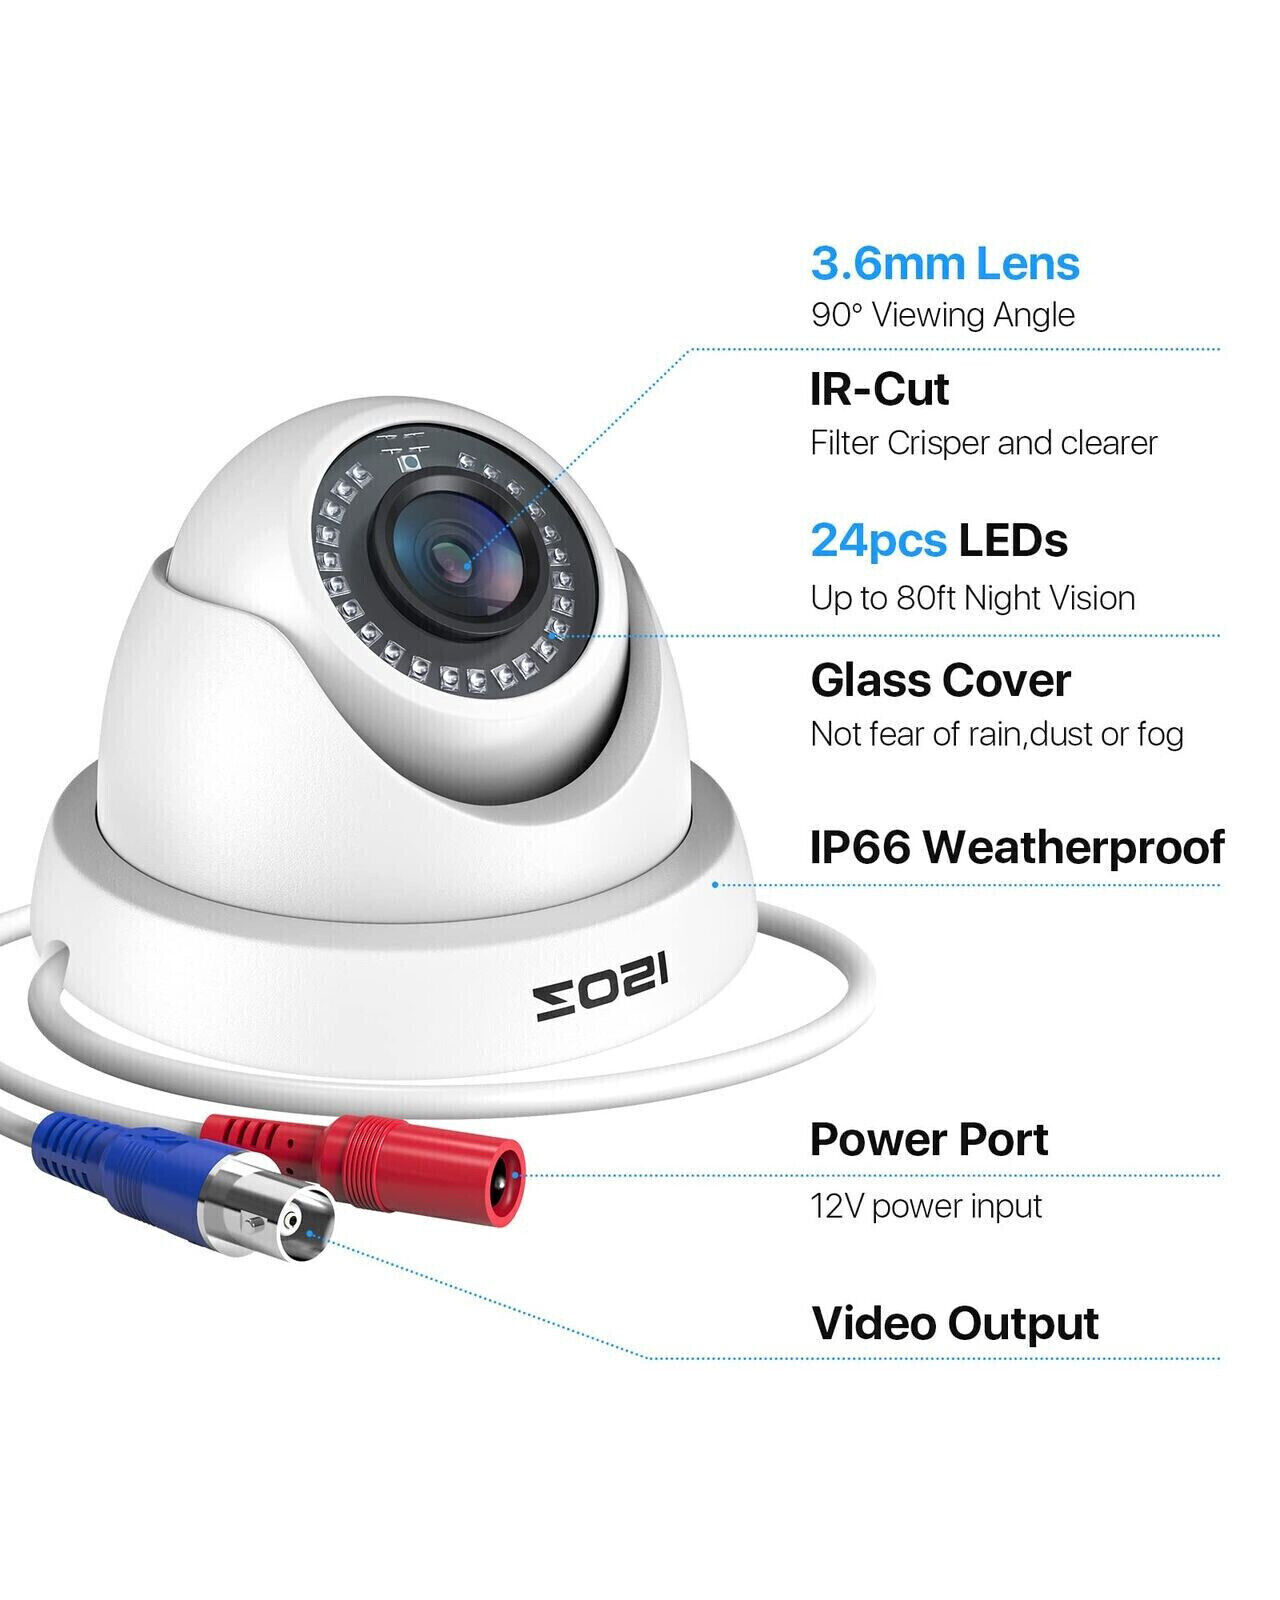 ZOSI 4Pcs 1080p TVI Outdoor CCTV Home Surveillance Security Dome Camera System ZOSI Does Not Apply - фотография #2